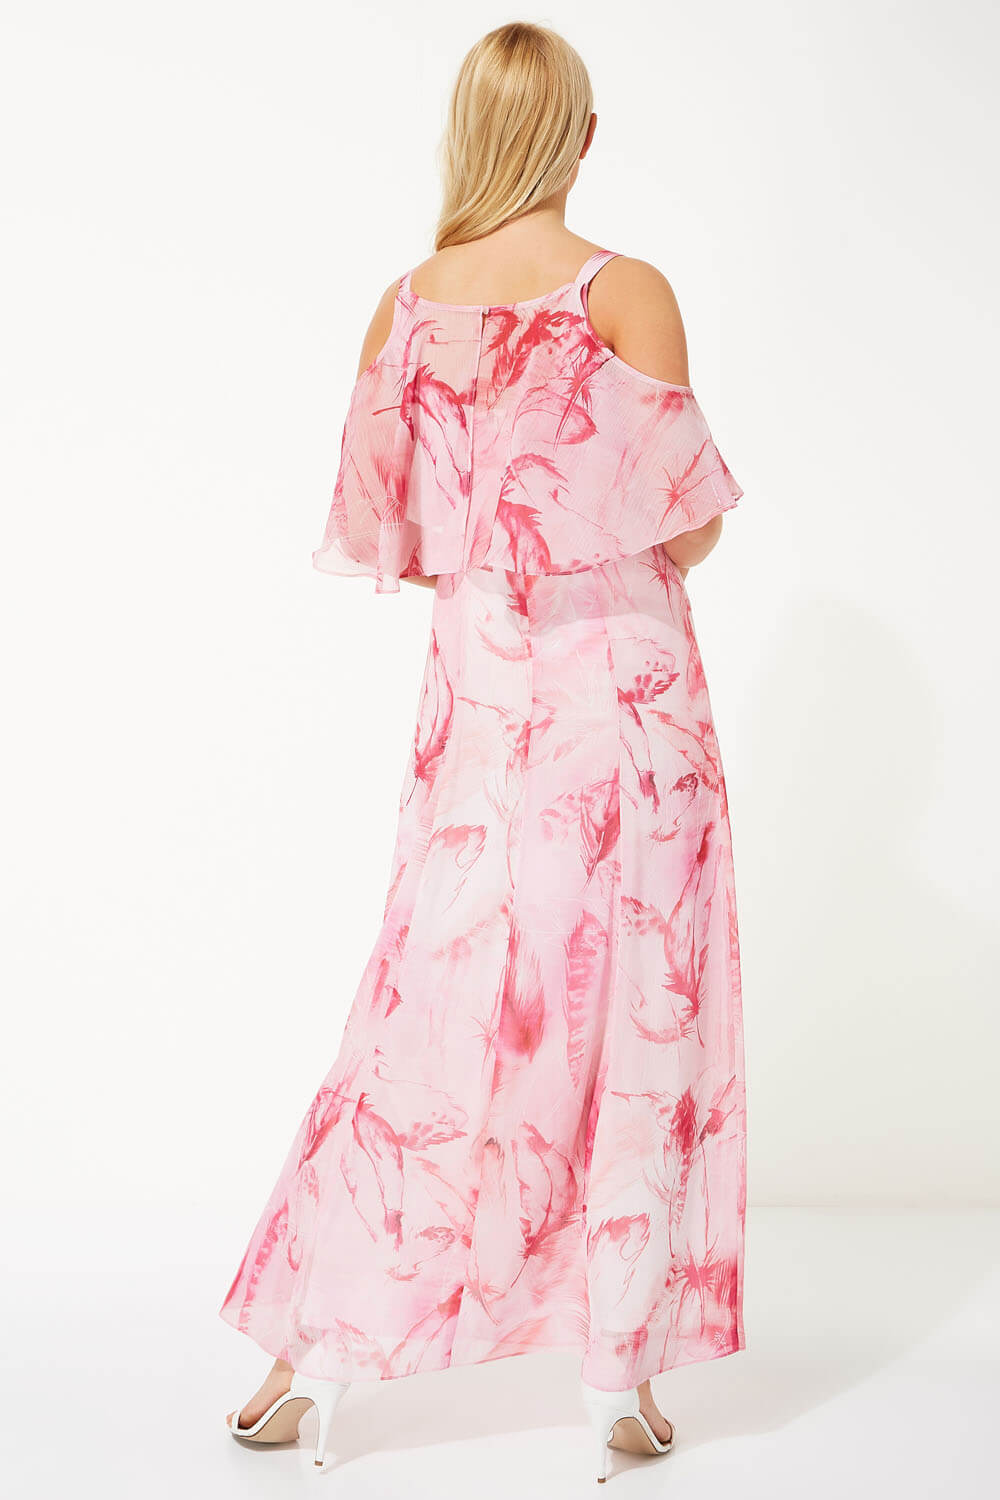 PINK Feather Print Cold Shoulder Maxi Dress, Image 2 of 4